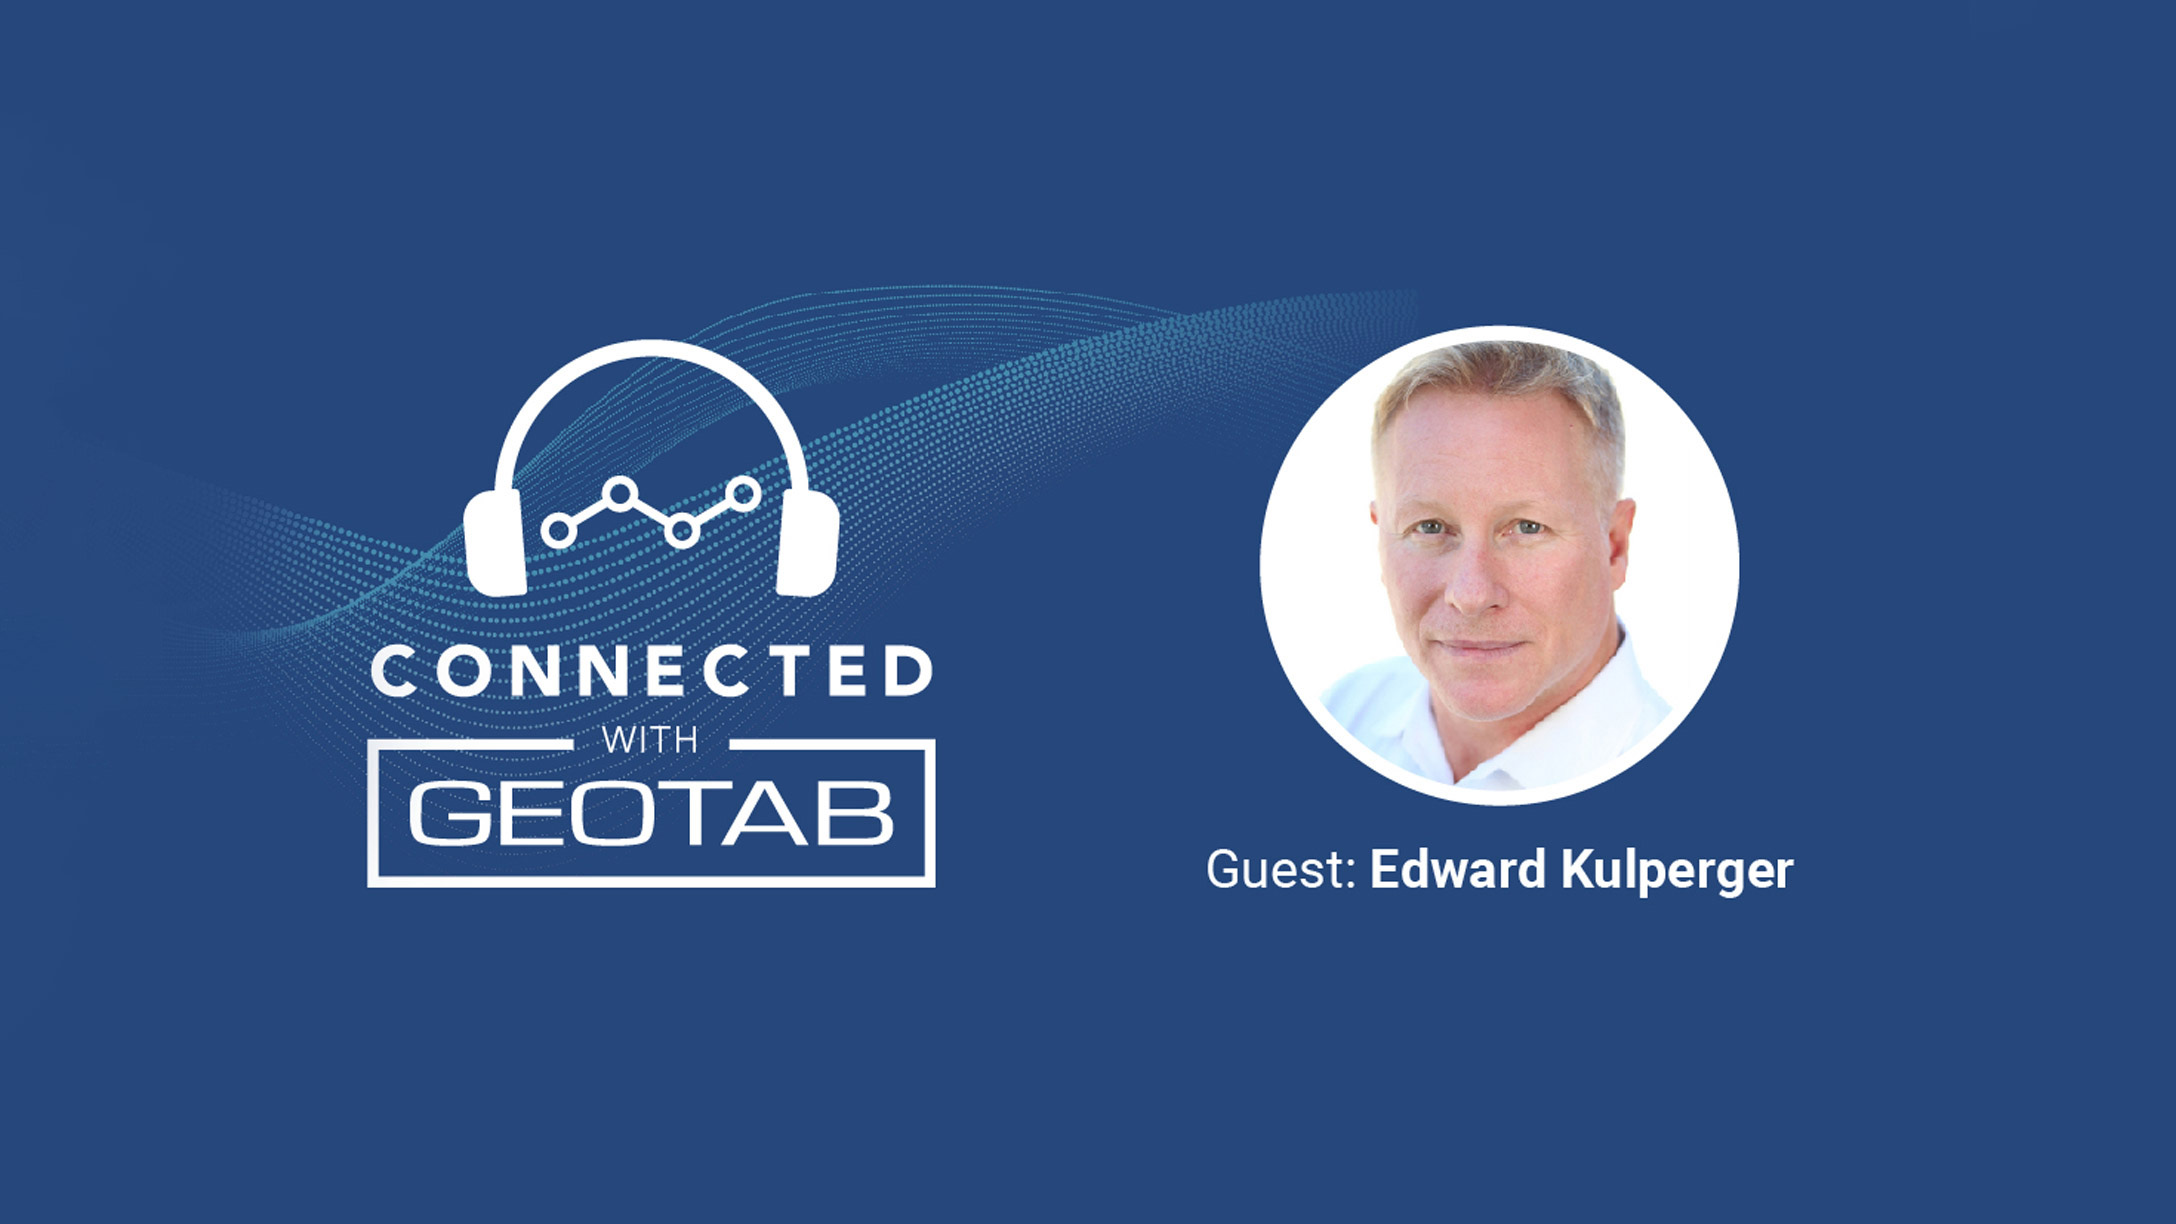 Connected with Geotab podcast with guest Edward Kulperger